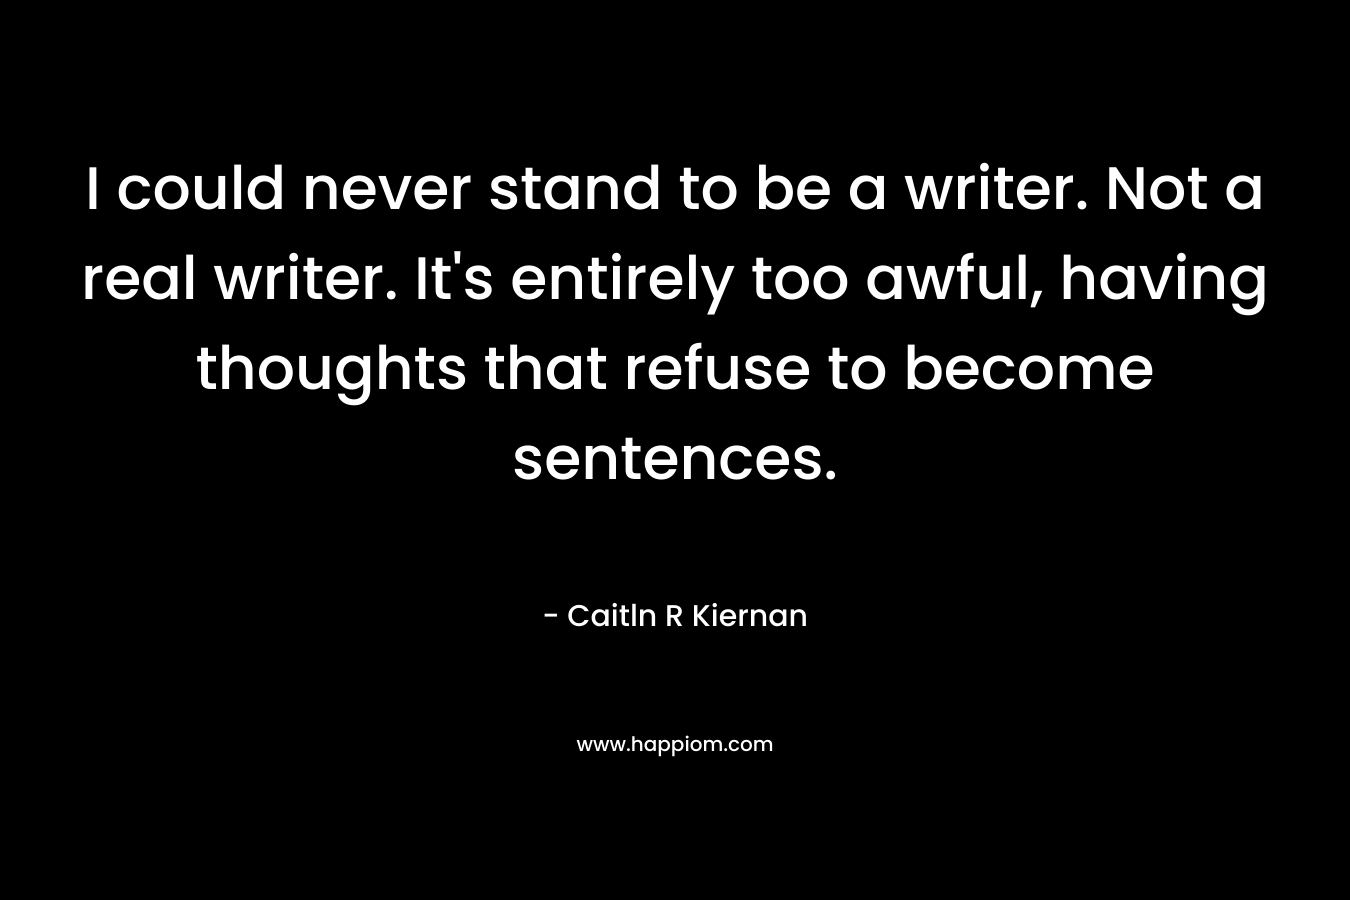 I could never stand to be a writer. Not a real writer. It’s entirely too awful, having thoughts that refuse to become sentences. – Caitln R Kiernan